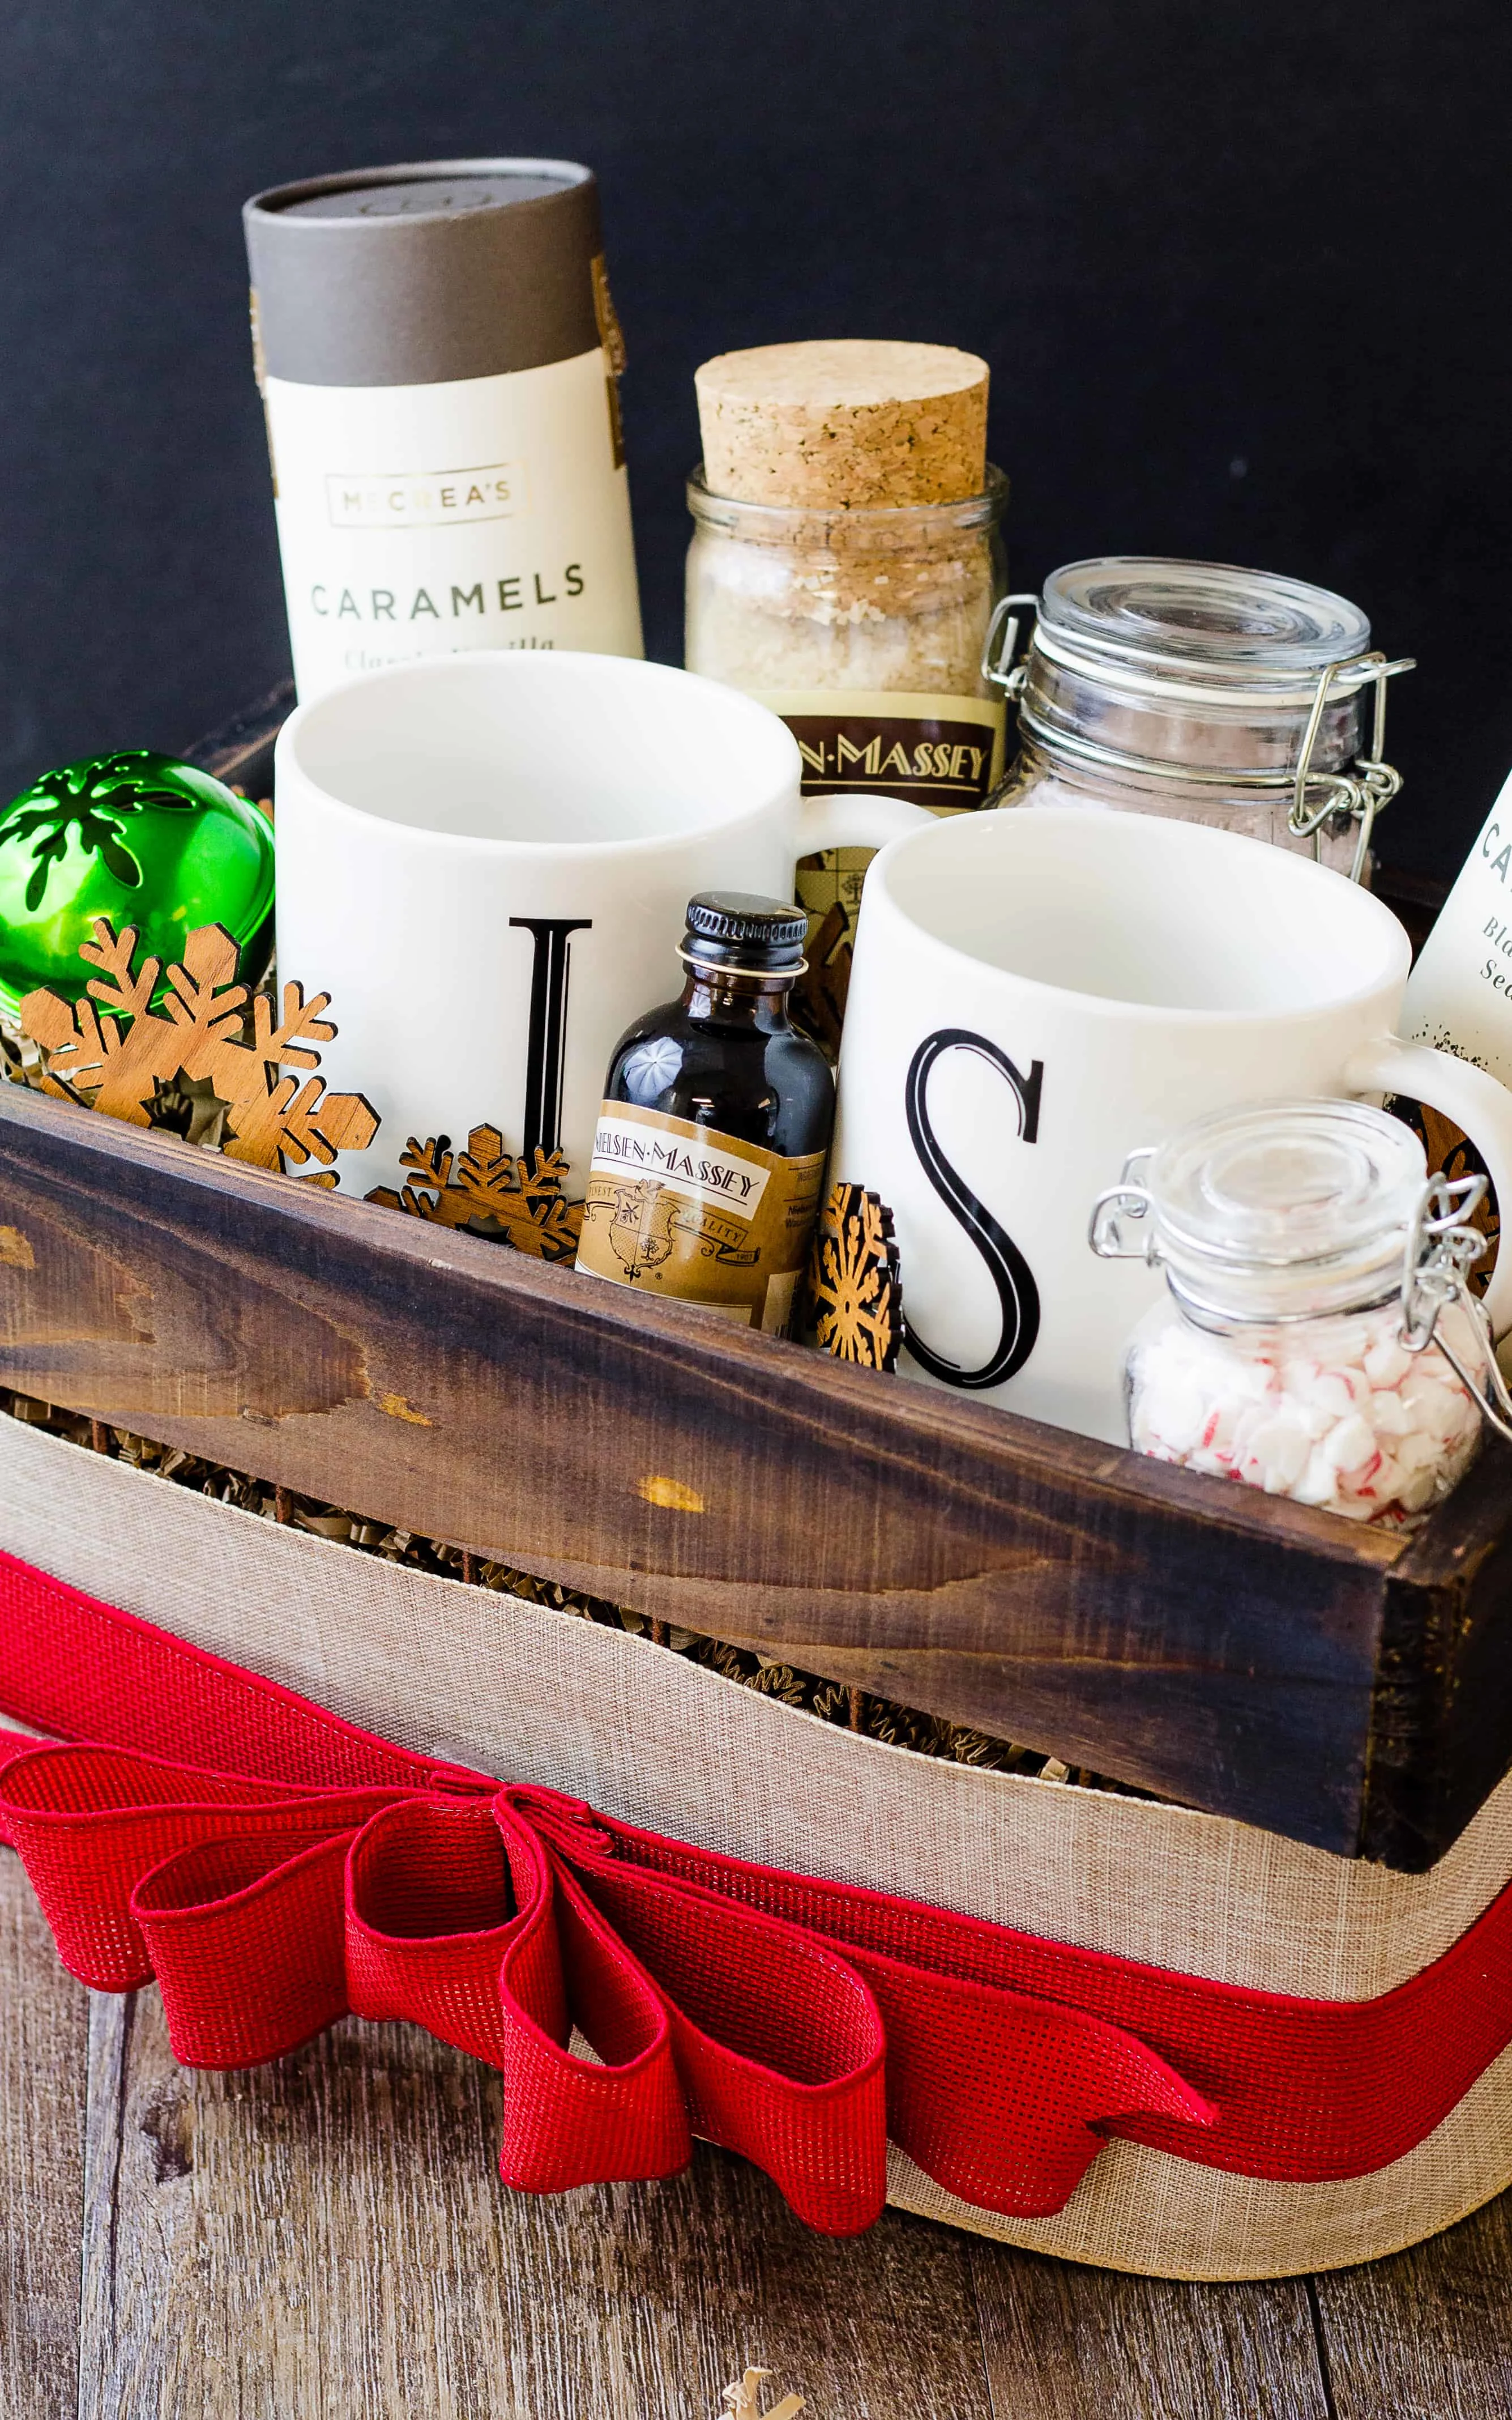 A special holiday gift! Gift Wrapping Get Away Gift Basket | Take Two Tapas | #CocoaMocha #Holidays #GiftBasket #Gifts #HostessGift #Caramels #AD